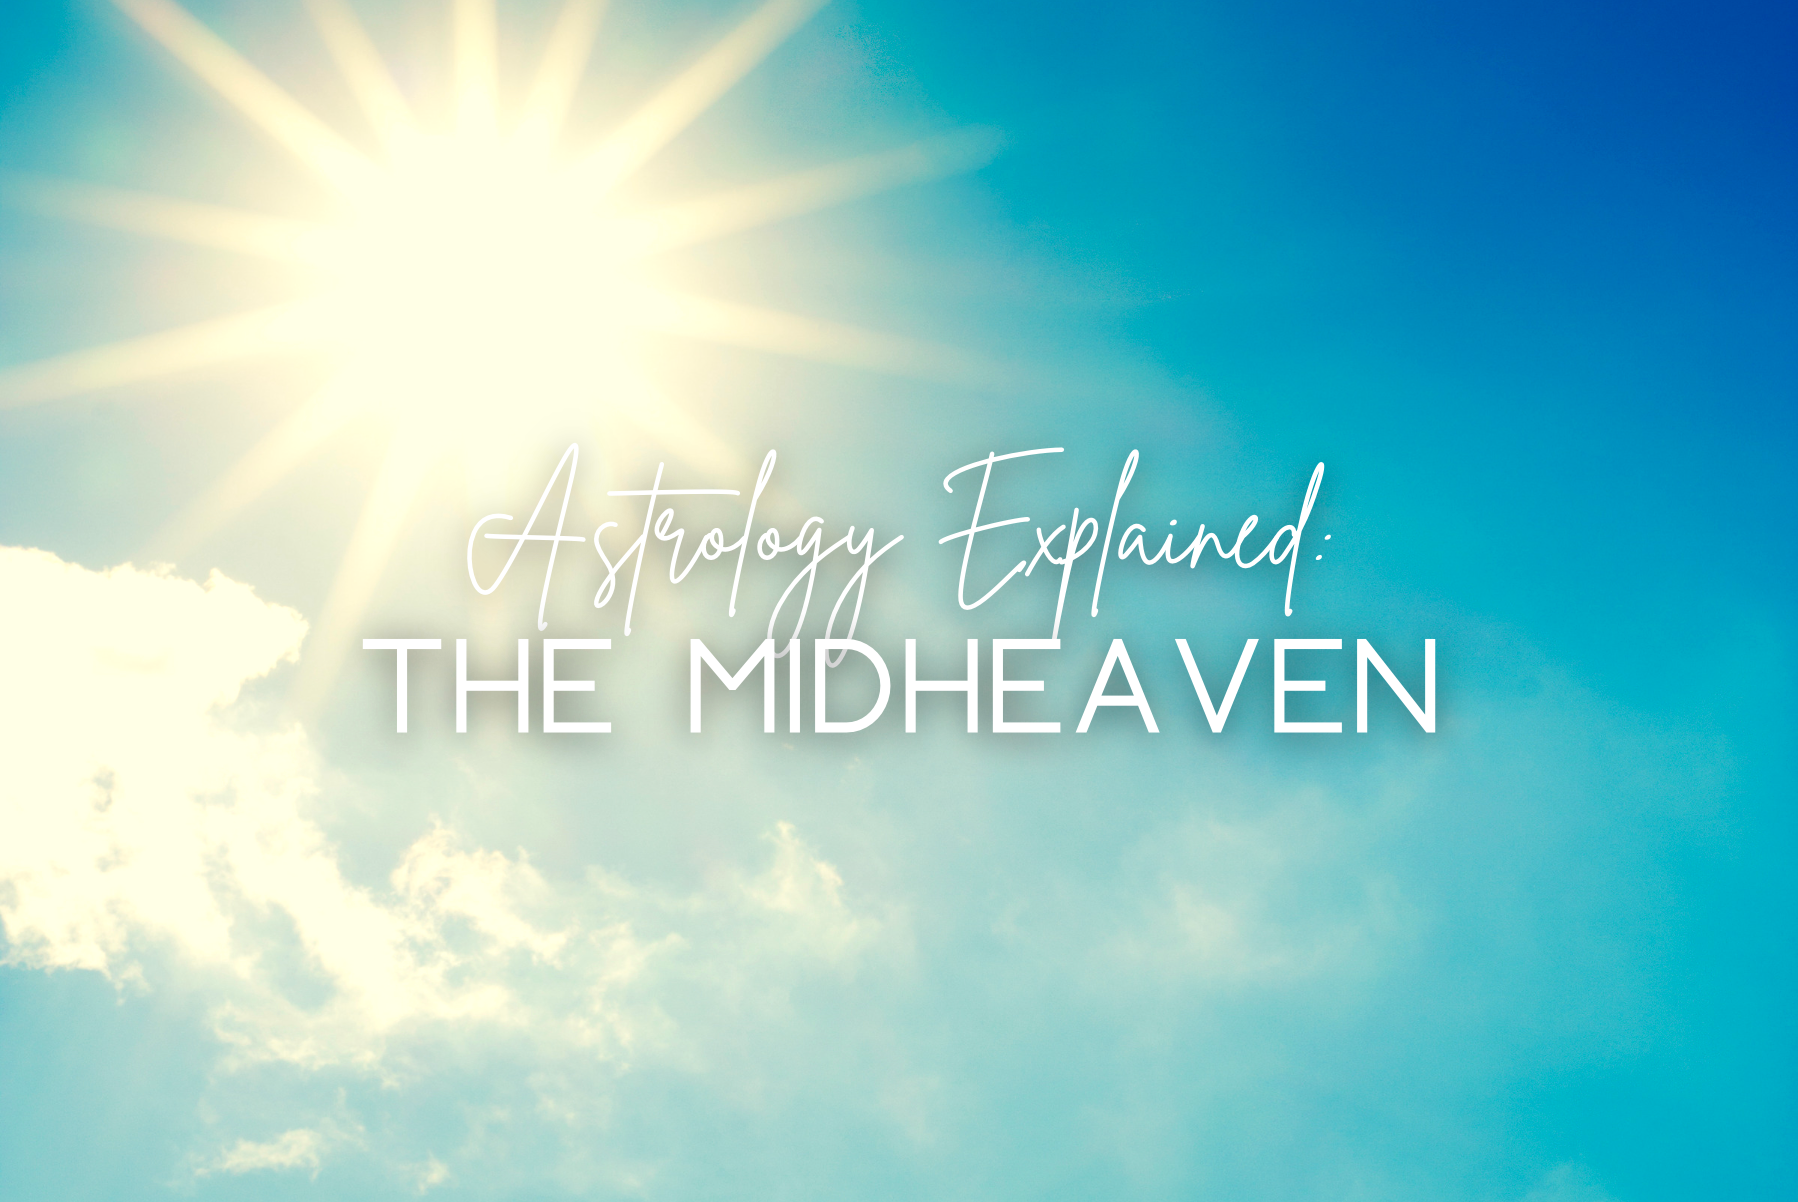 Astrology Explained: The Midheaven